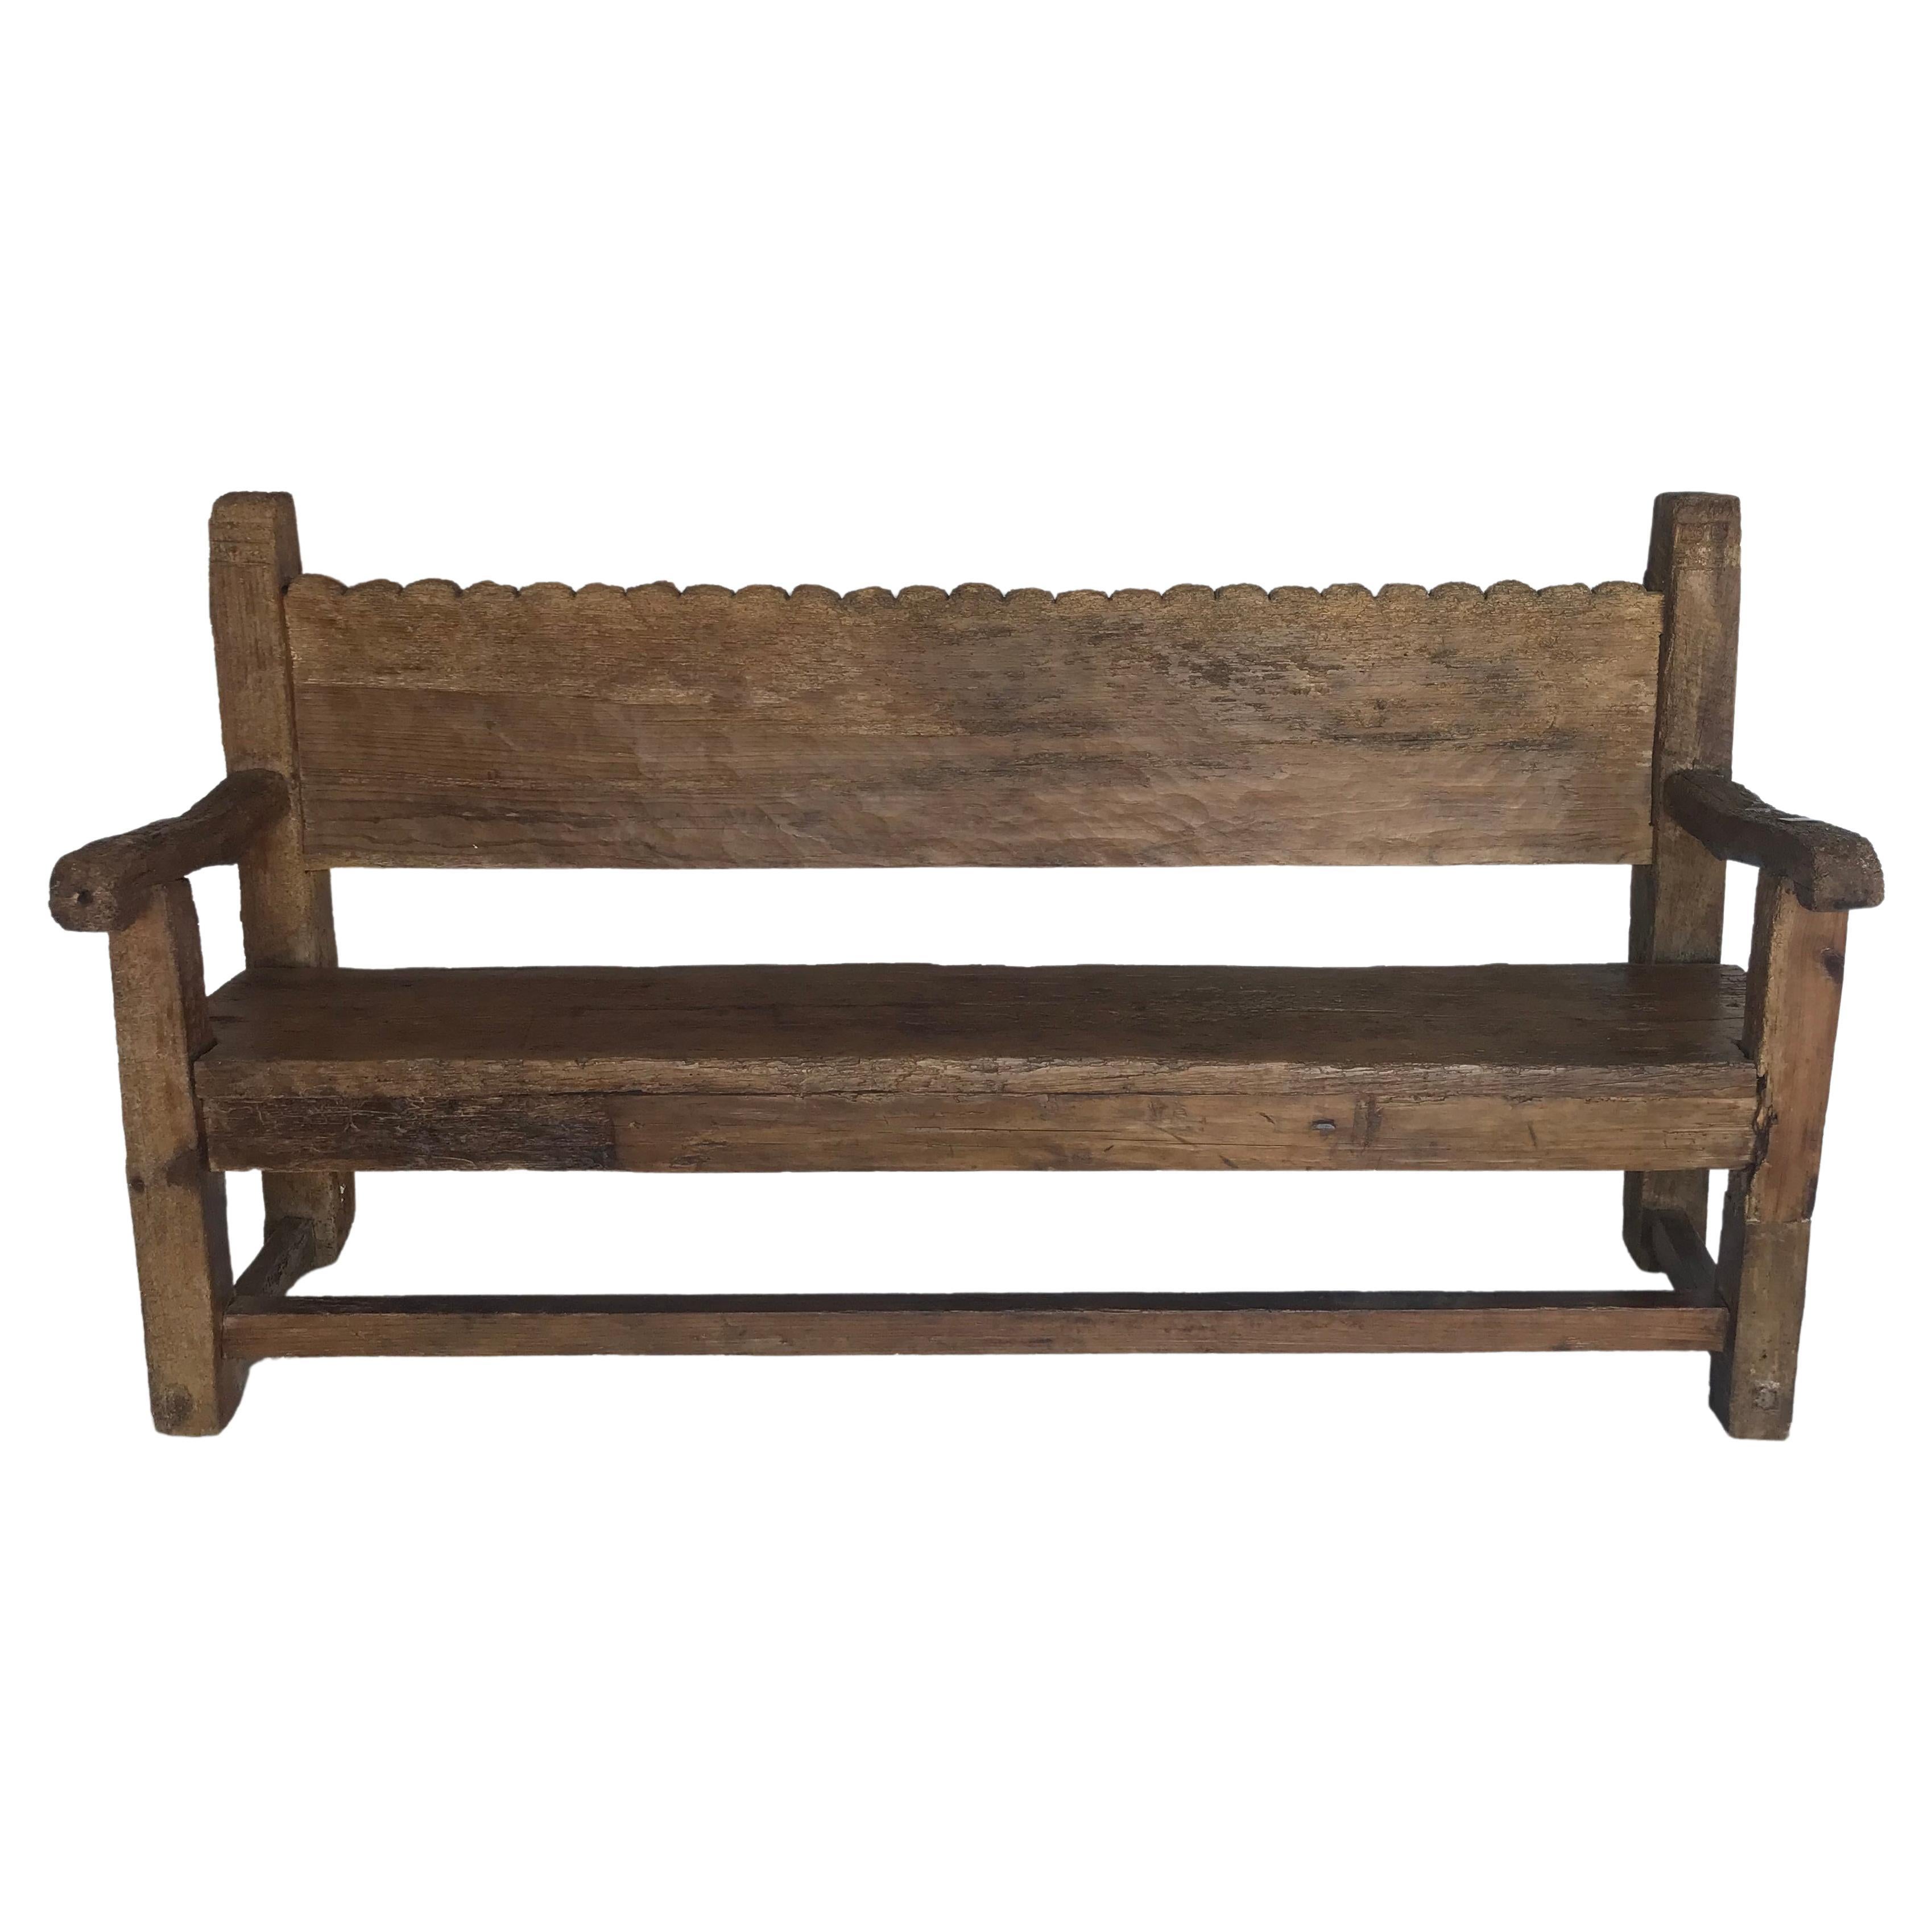 19th Century Rustic Bench with Scalloped Back